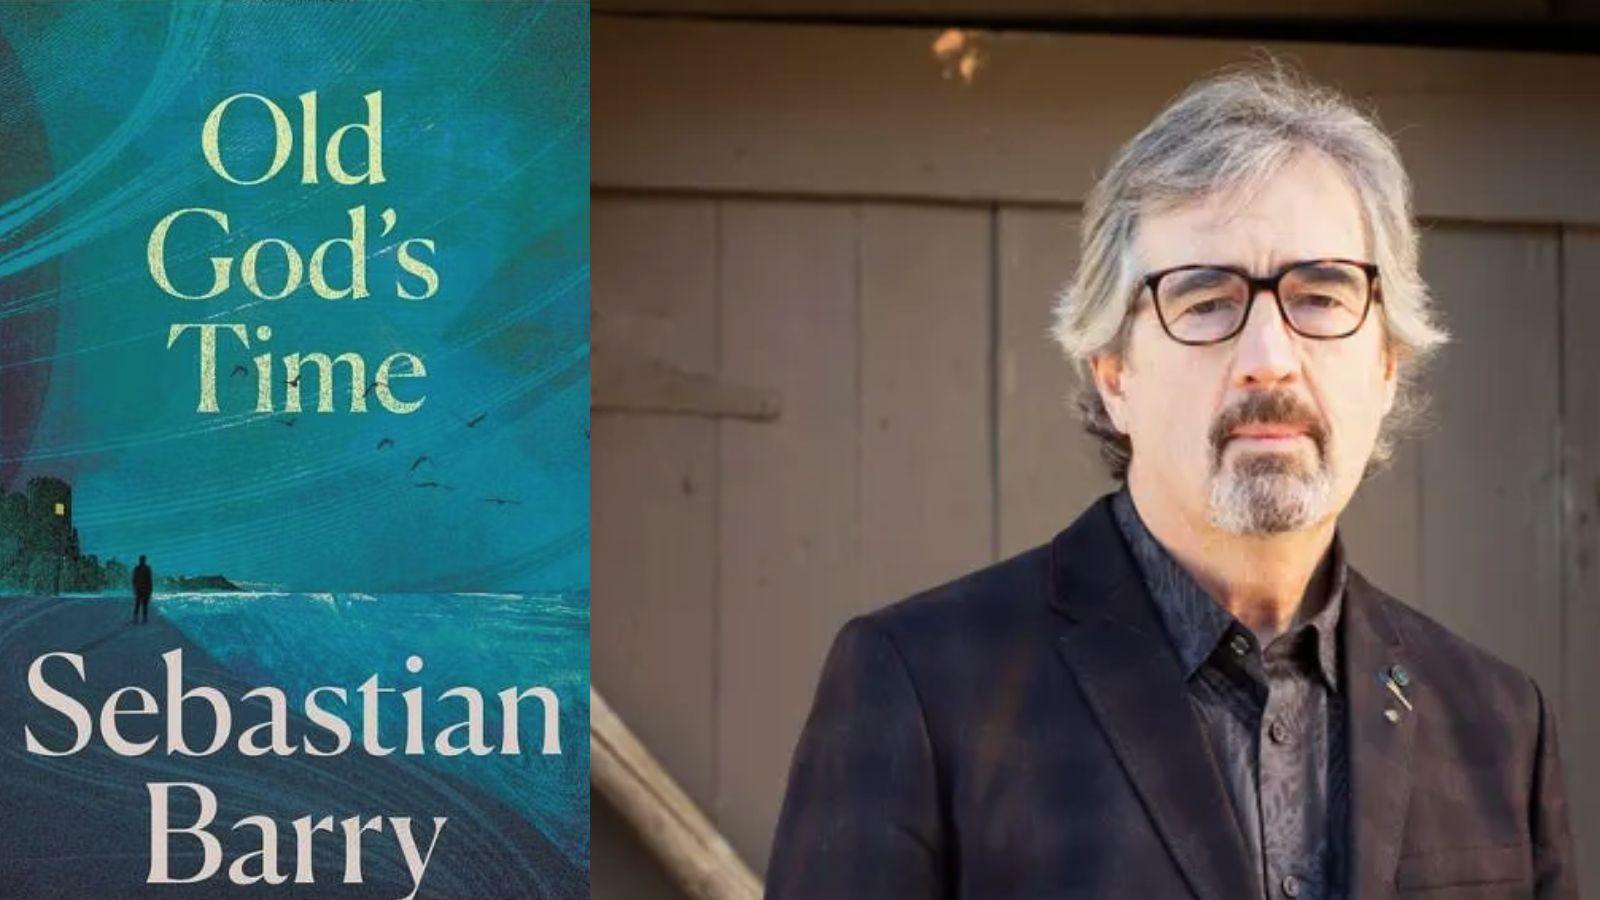 Sebastian Barry and his book cover